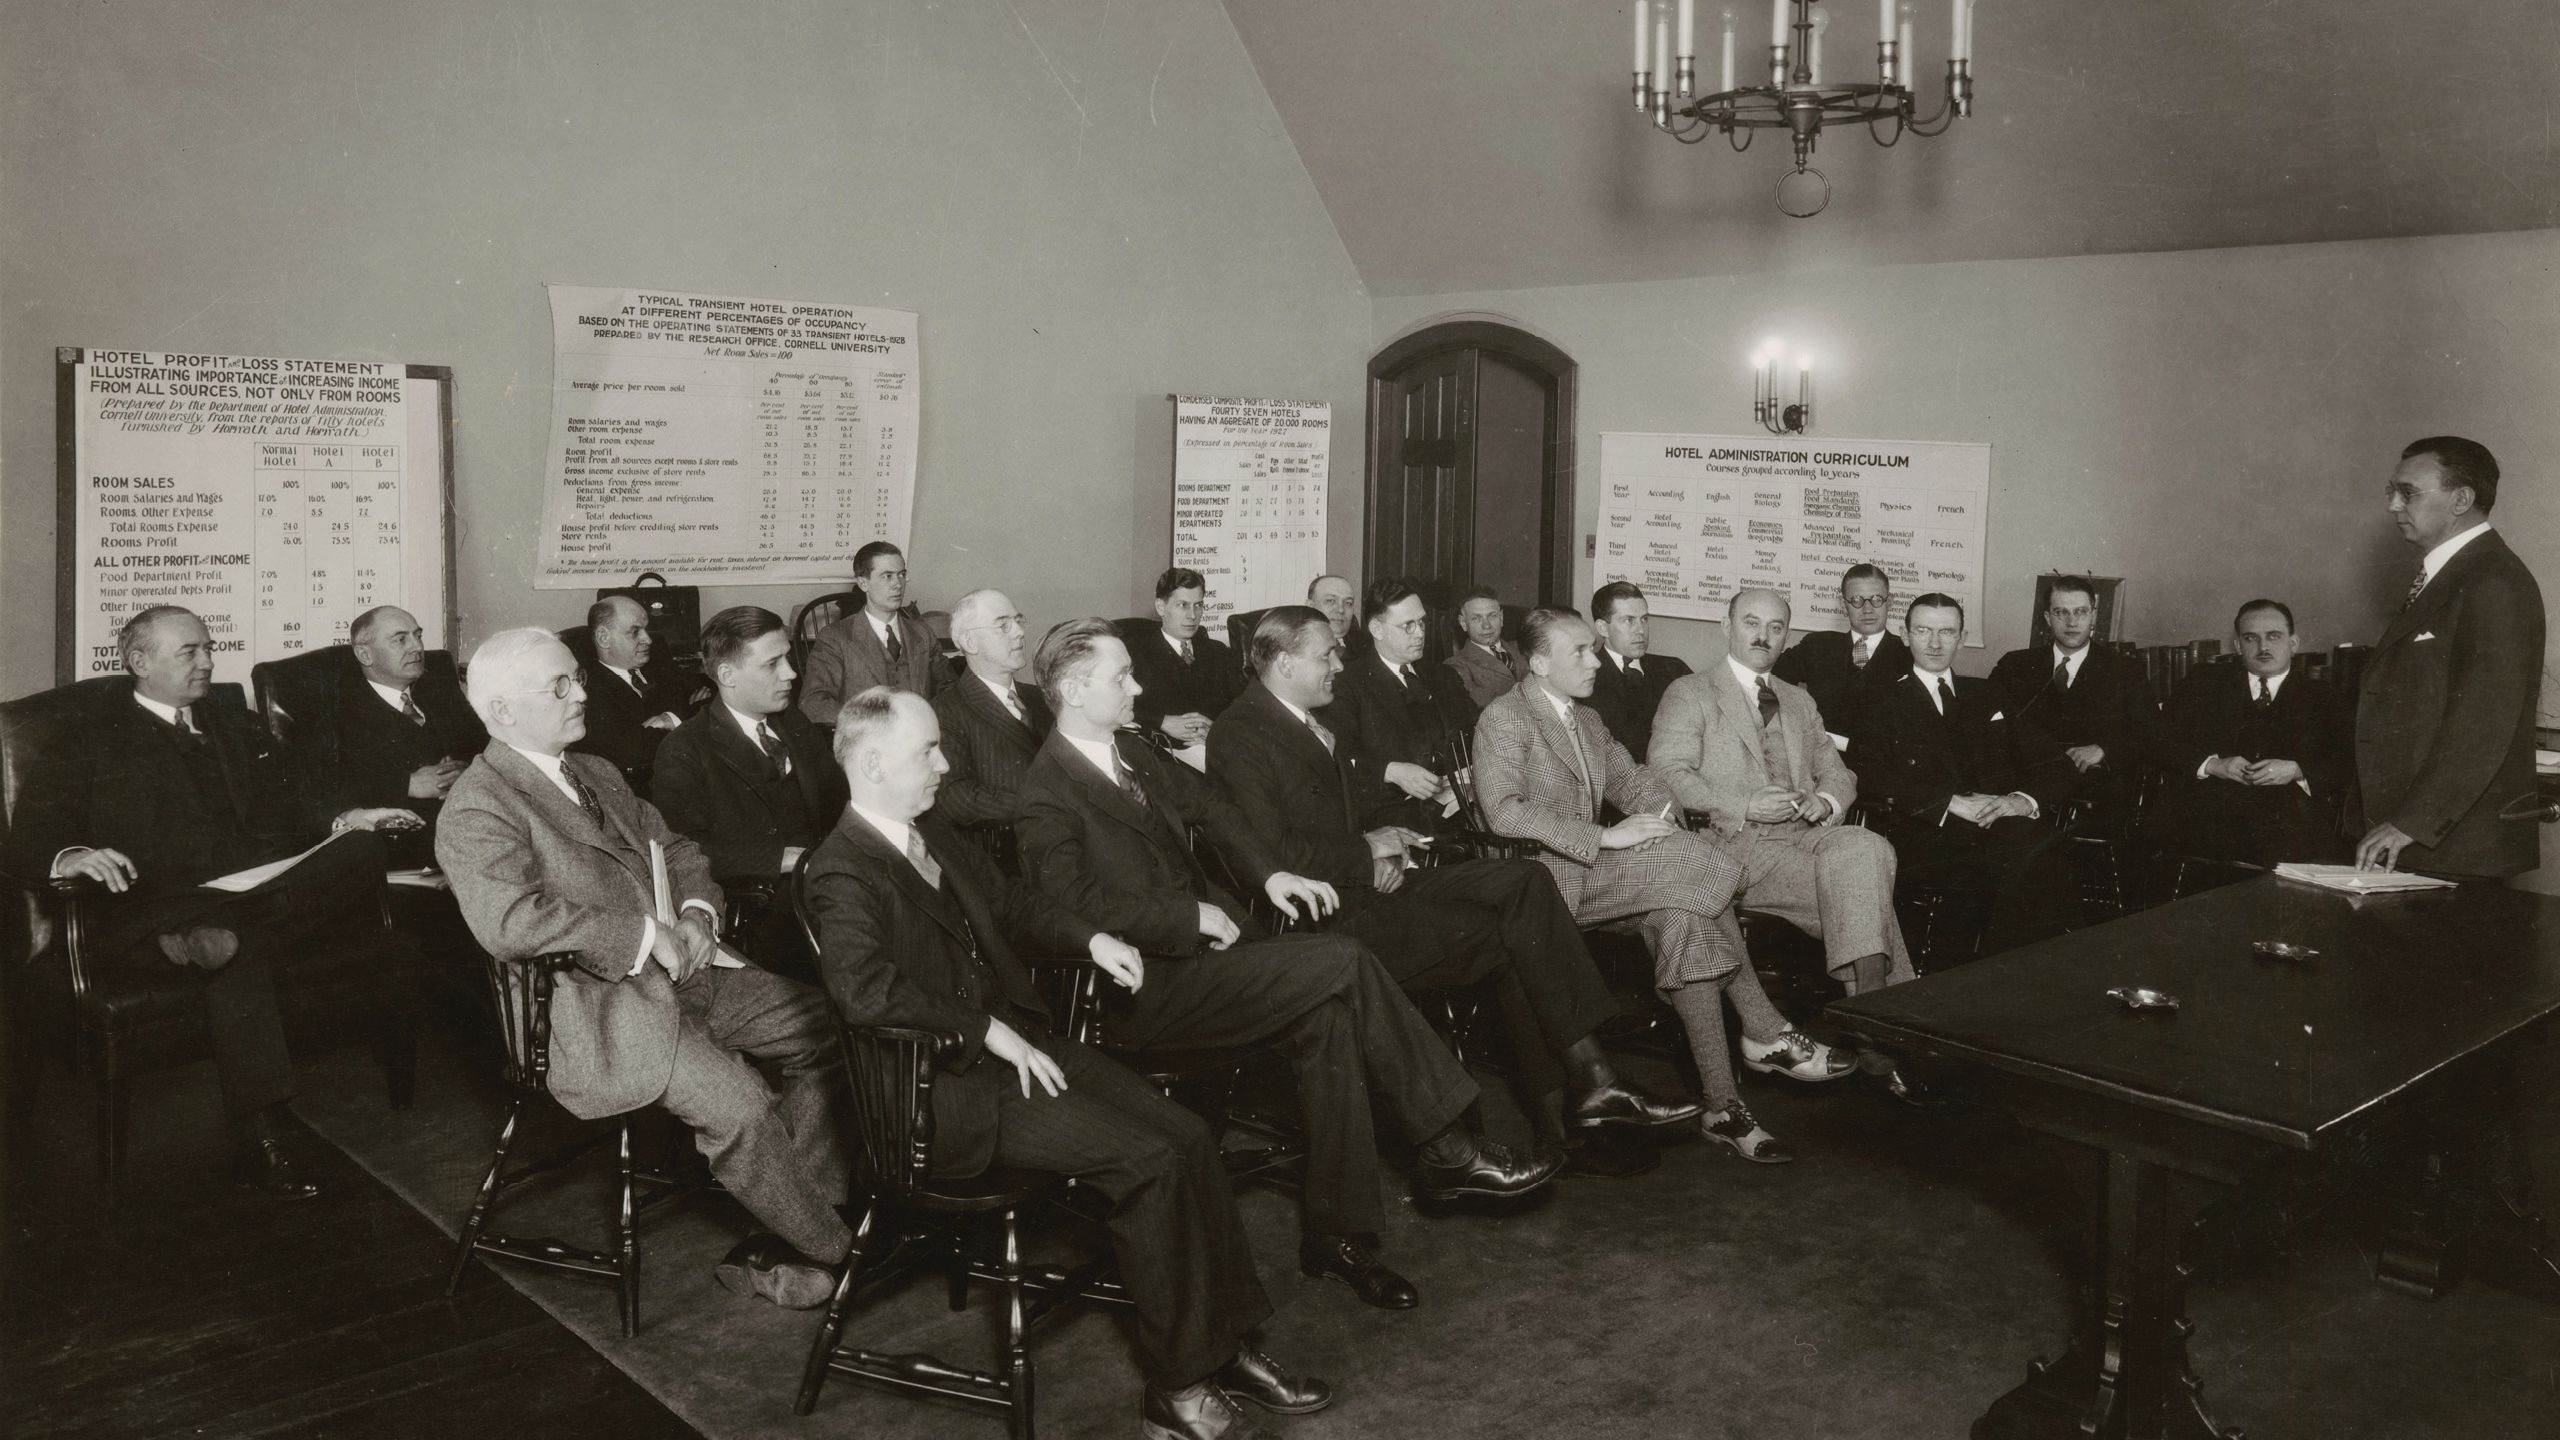 Black and white photo of men in suits sitting in wooden chairs.